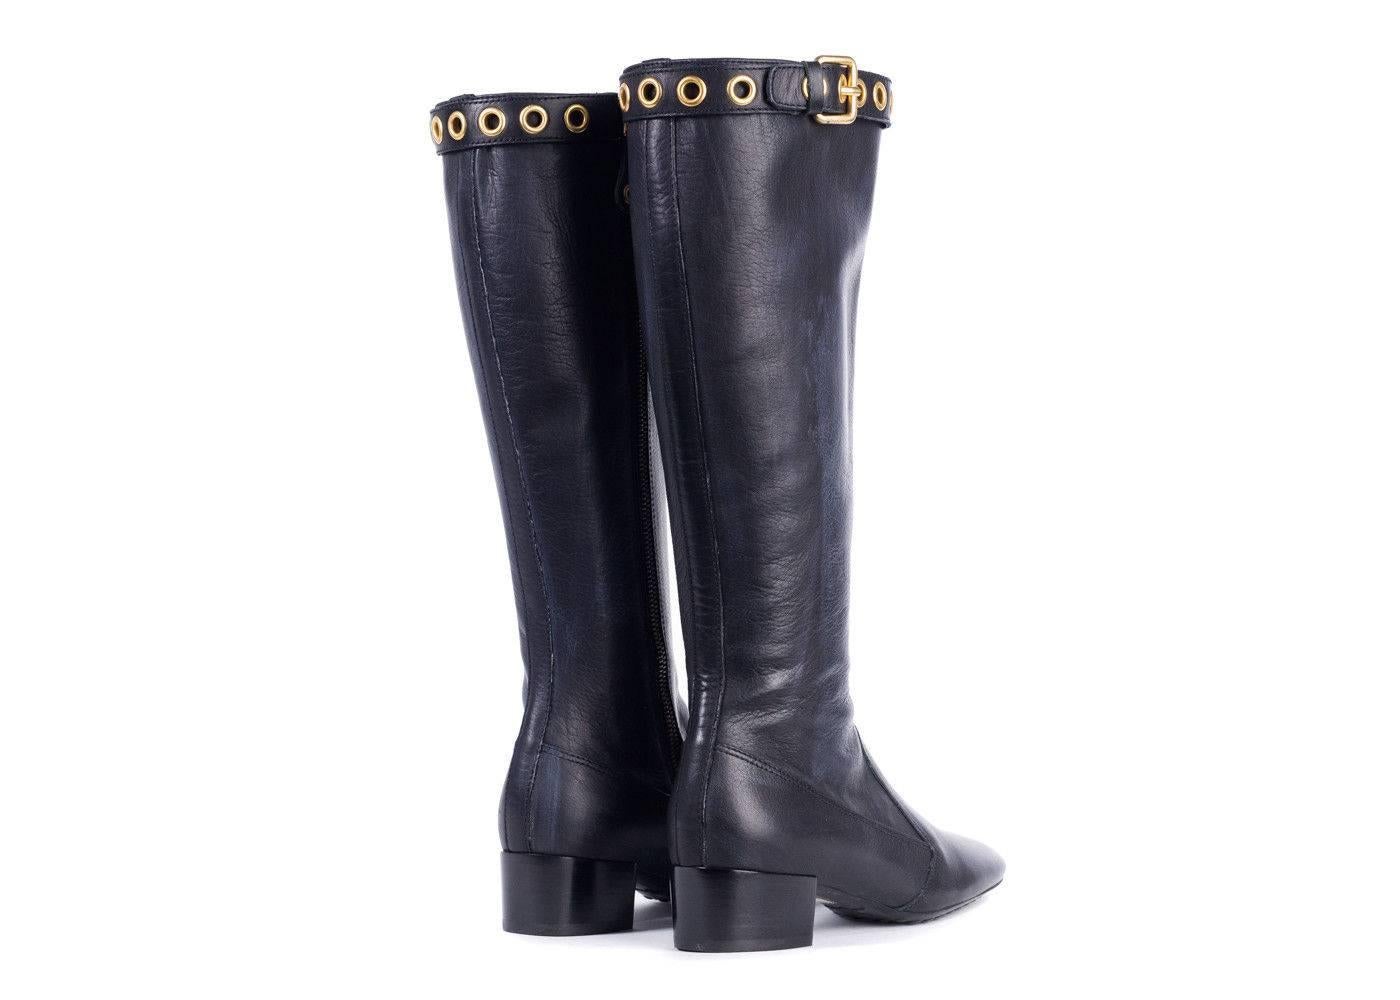 Car Shoe Women's Black Leather Gold Buckle Tall Boots In New Condition For Sale In Brooklyn, NY